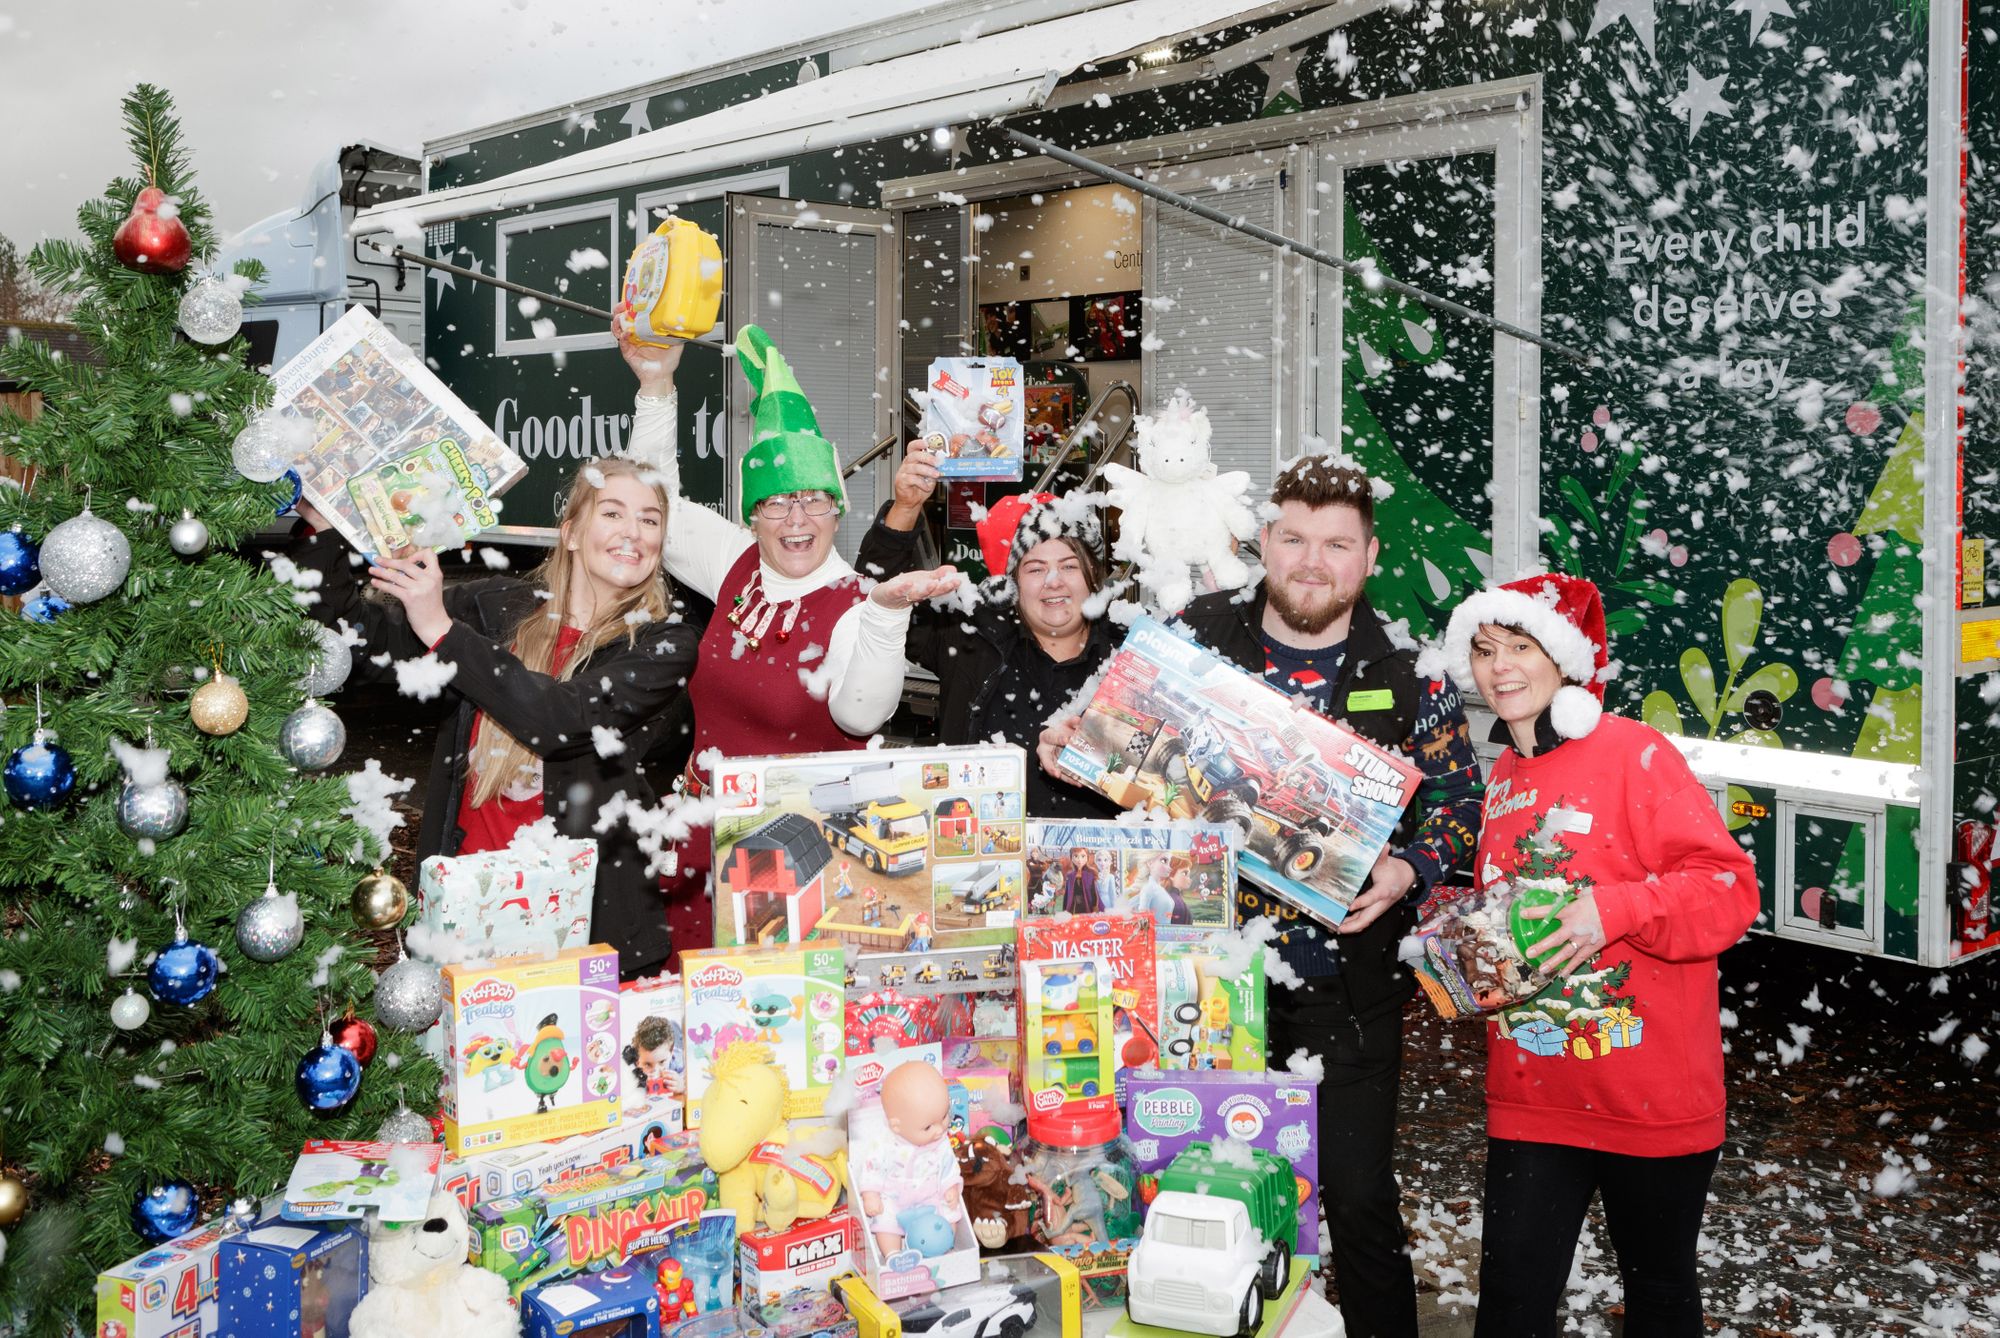 Over 240 gifts donated at Christmas Toy Appeal event in Norfolk